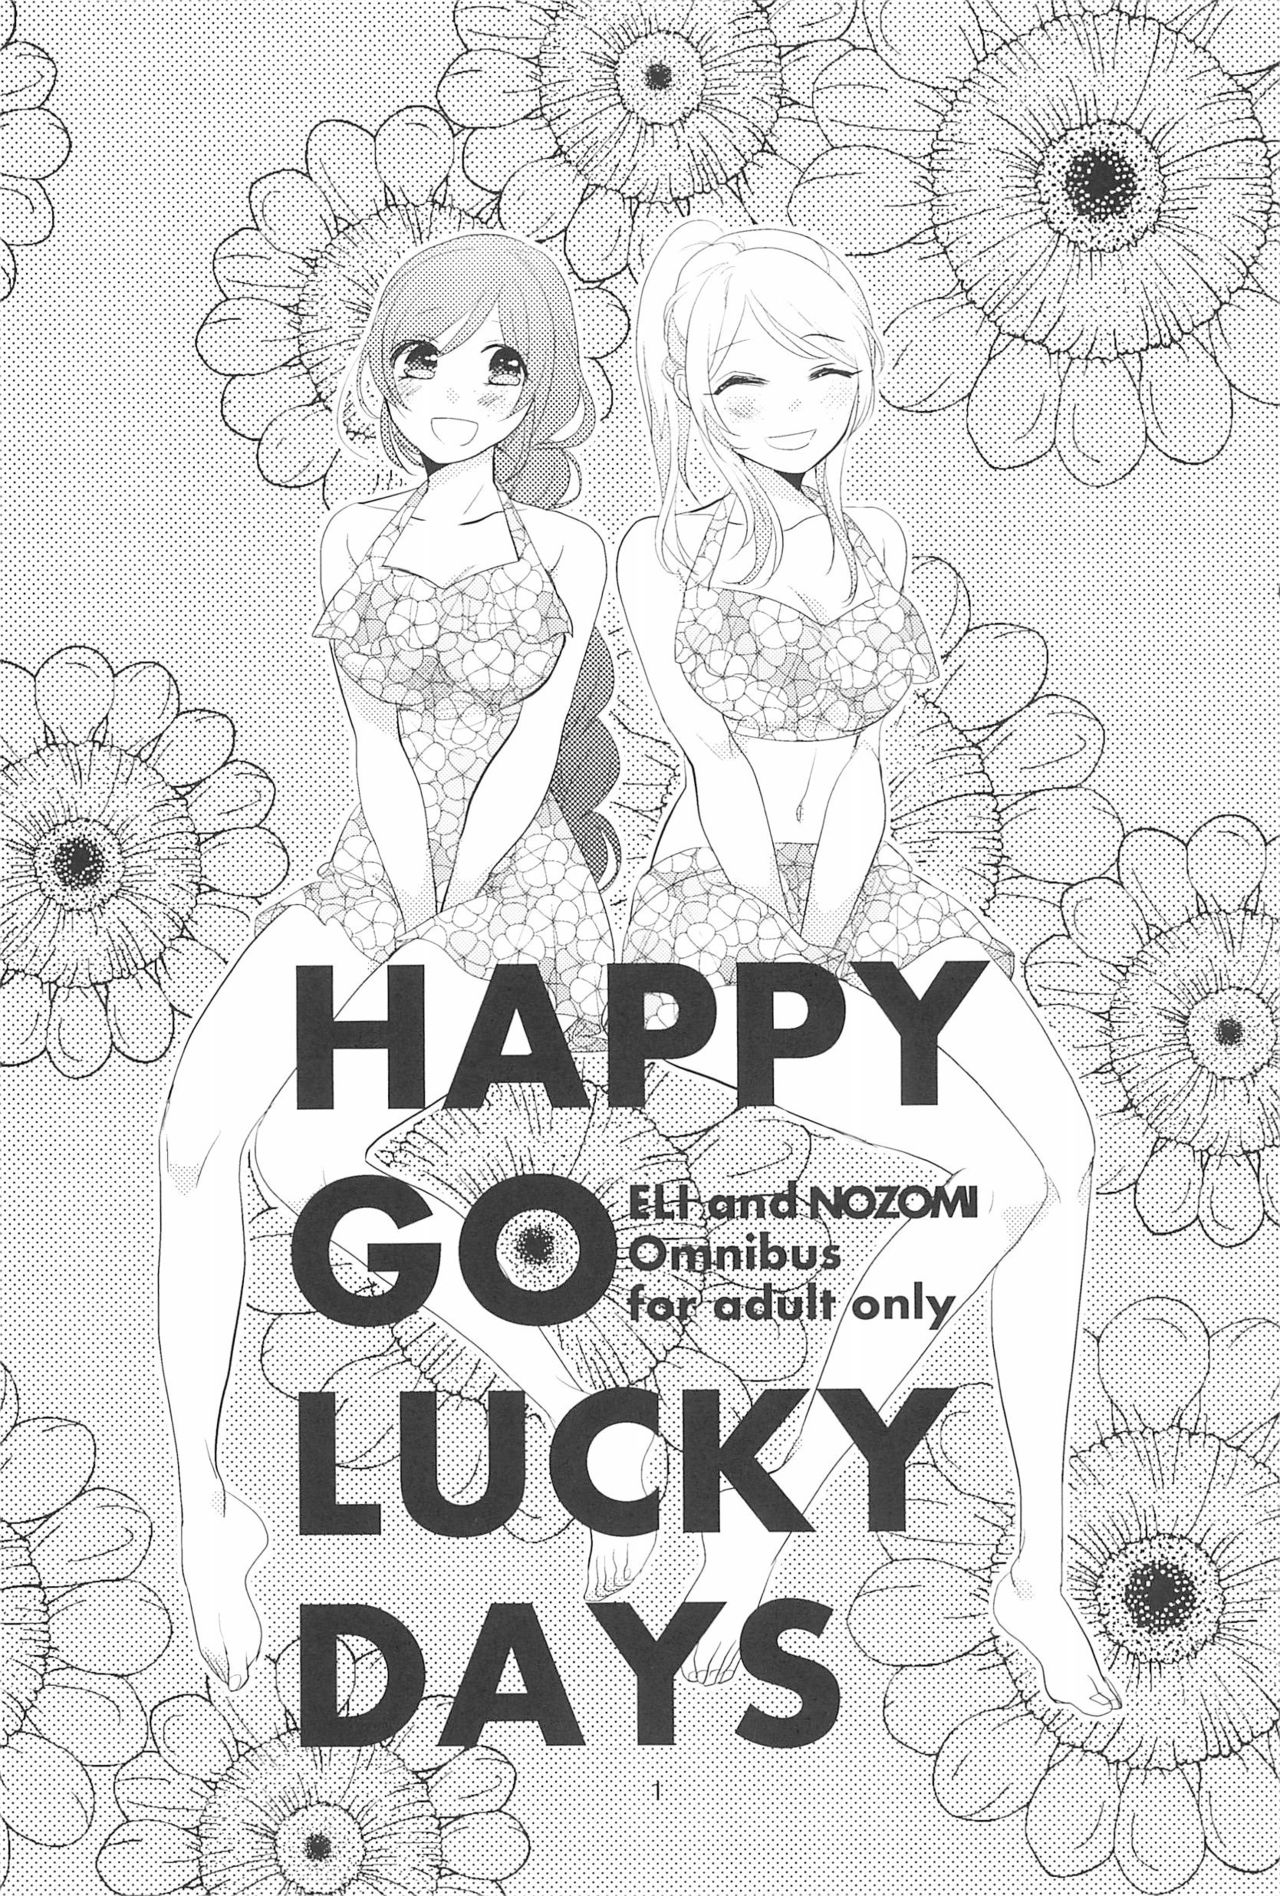 (C90) [BK*N2 (Mikawa Miso)] HAPPY GO LUCKY DAYS (Love Live!) page 5 full